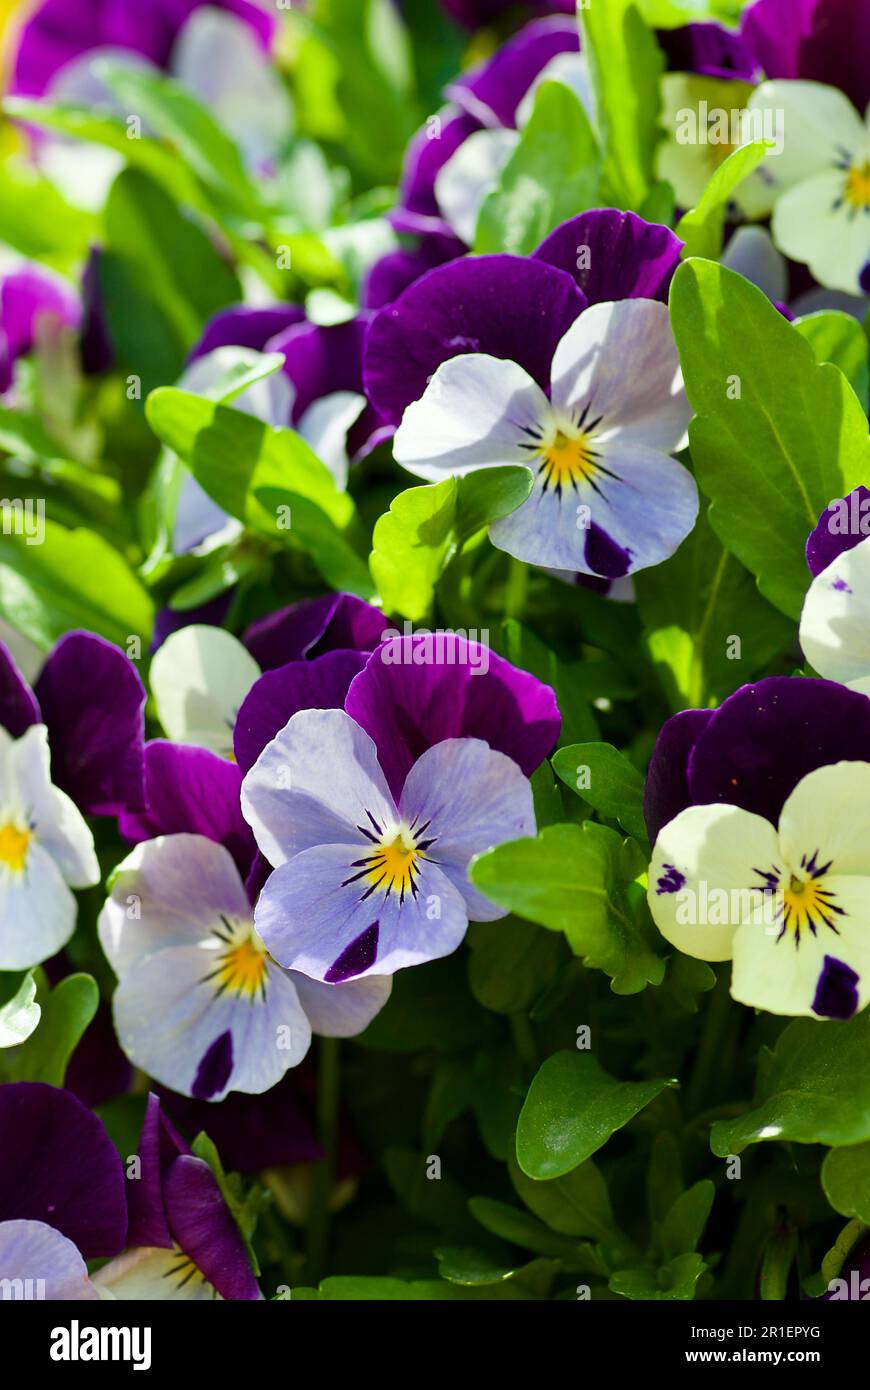 Closeup of small wild pansy flowers in a flowerbed in spring. Stock Photo